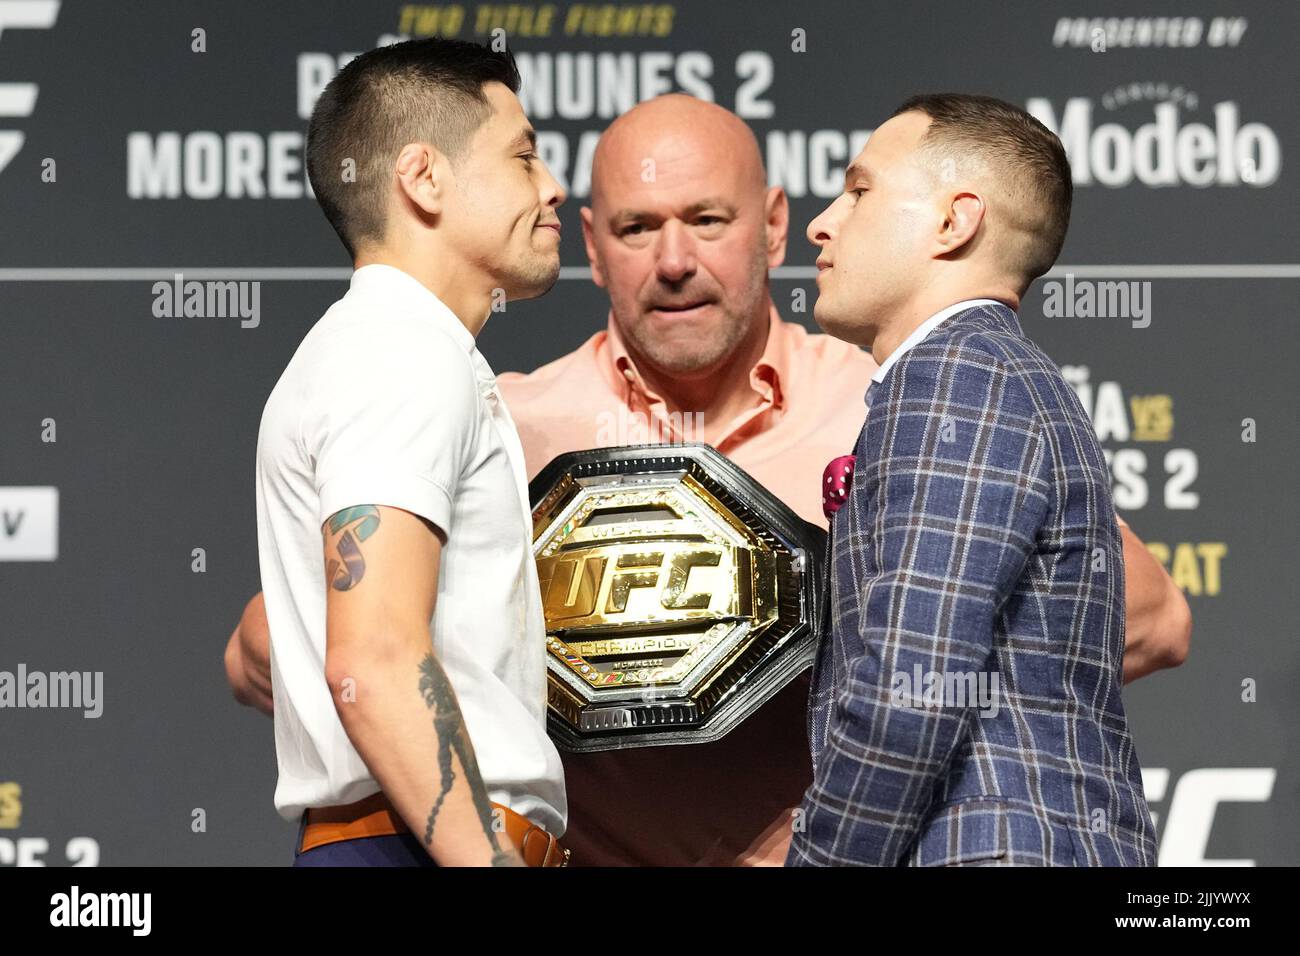 Dallas, Texas, United States. 28th July, 2022. DALLAS, TX - July 28: Brandon Moreno (L) and Kai Kara-France (R) face-off at American Airlines Center for UFC 277 - Peña vs Nunes 2 : Press Conference on July 28, 2022 in Dallas, Texas, United States. (Photo by Louis Grasse/PxImages) Credit: Px Images/Alamy Live News Stock Photo